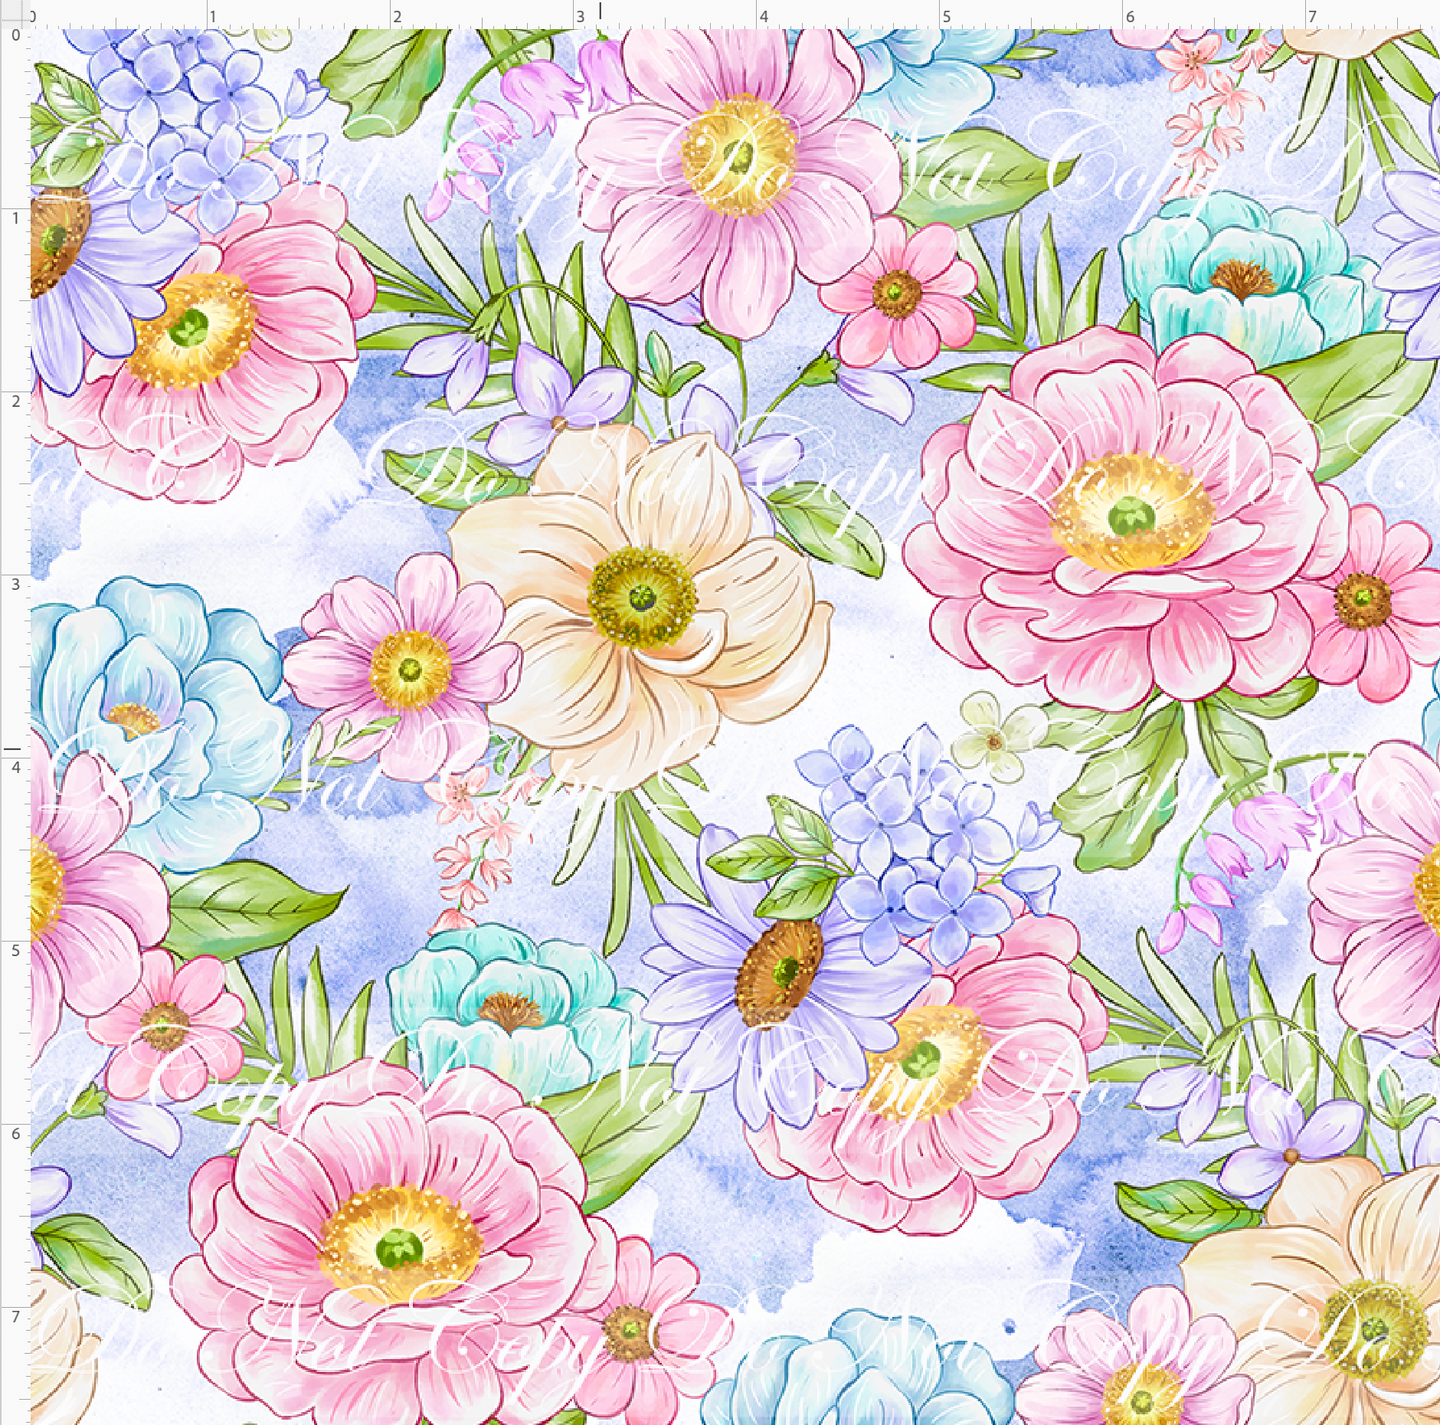 CATALOG - PREORDER R128 - Bunny Bliss - Floral - Periwinkle - SMALL SCALE